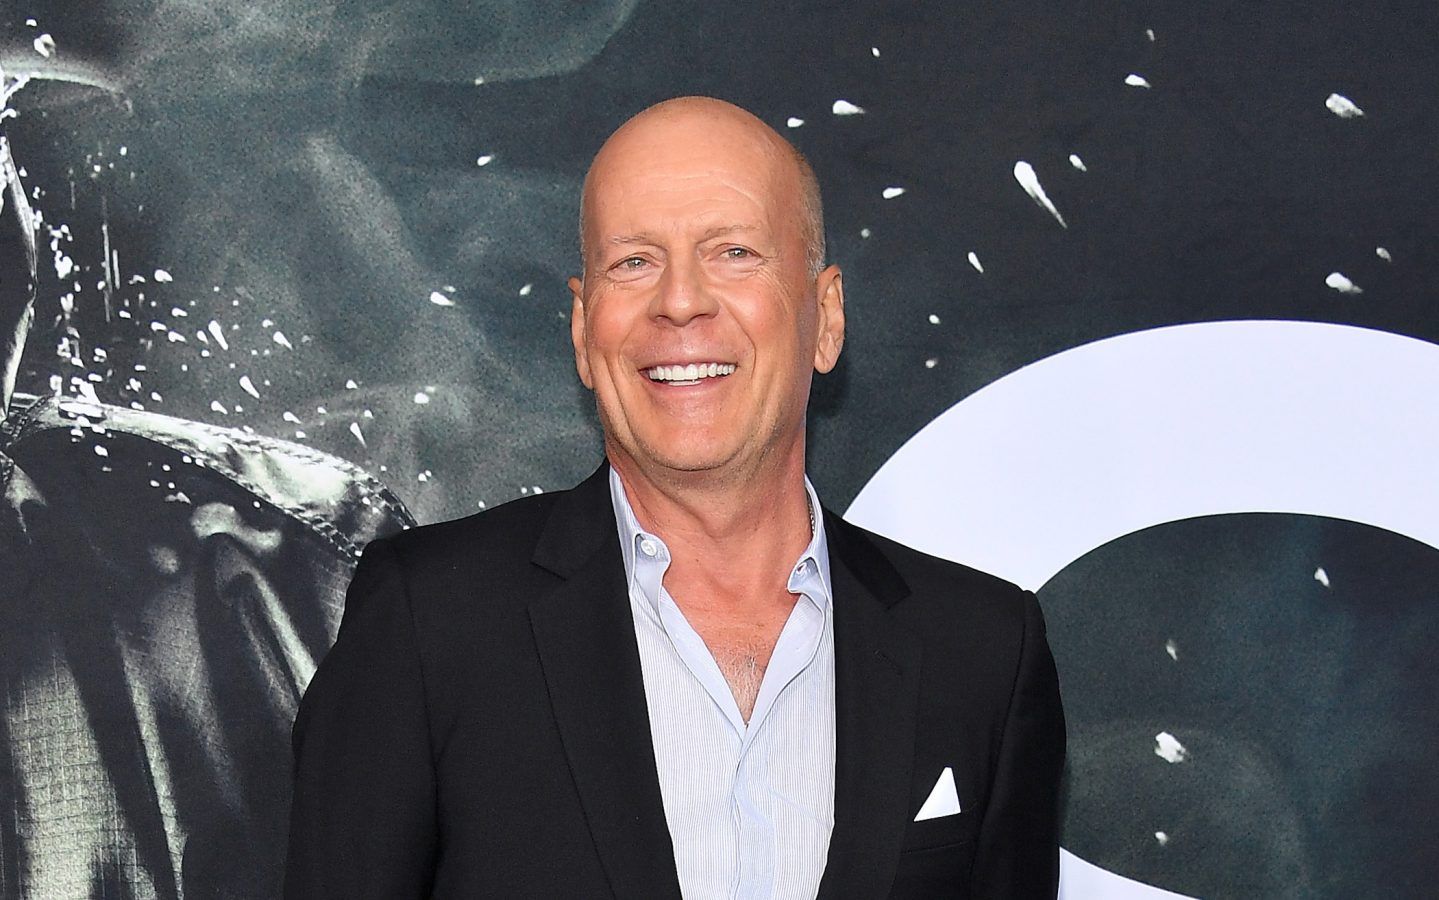 Bruce Willis Has Frontotemporal Dementia. What Are Its Symptoms?